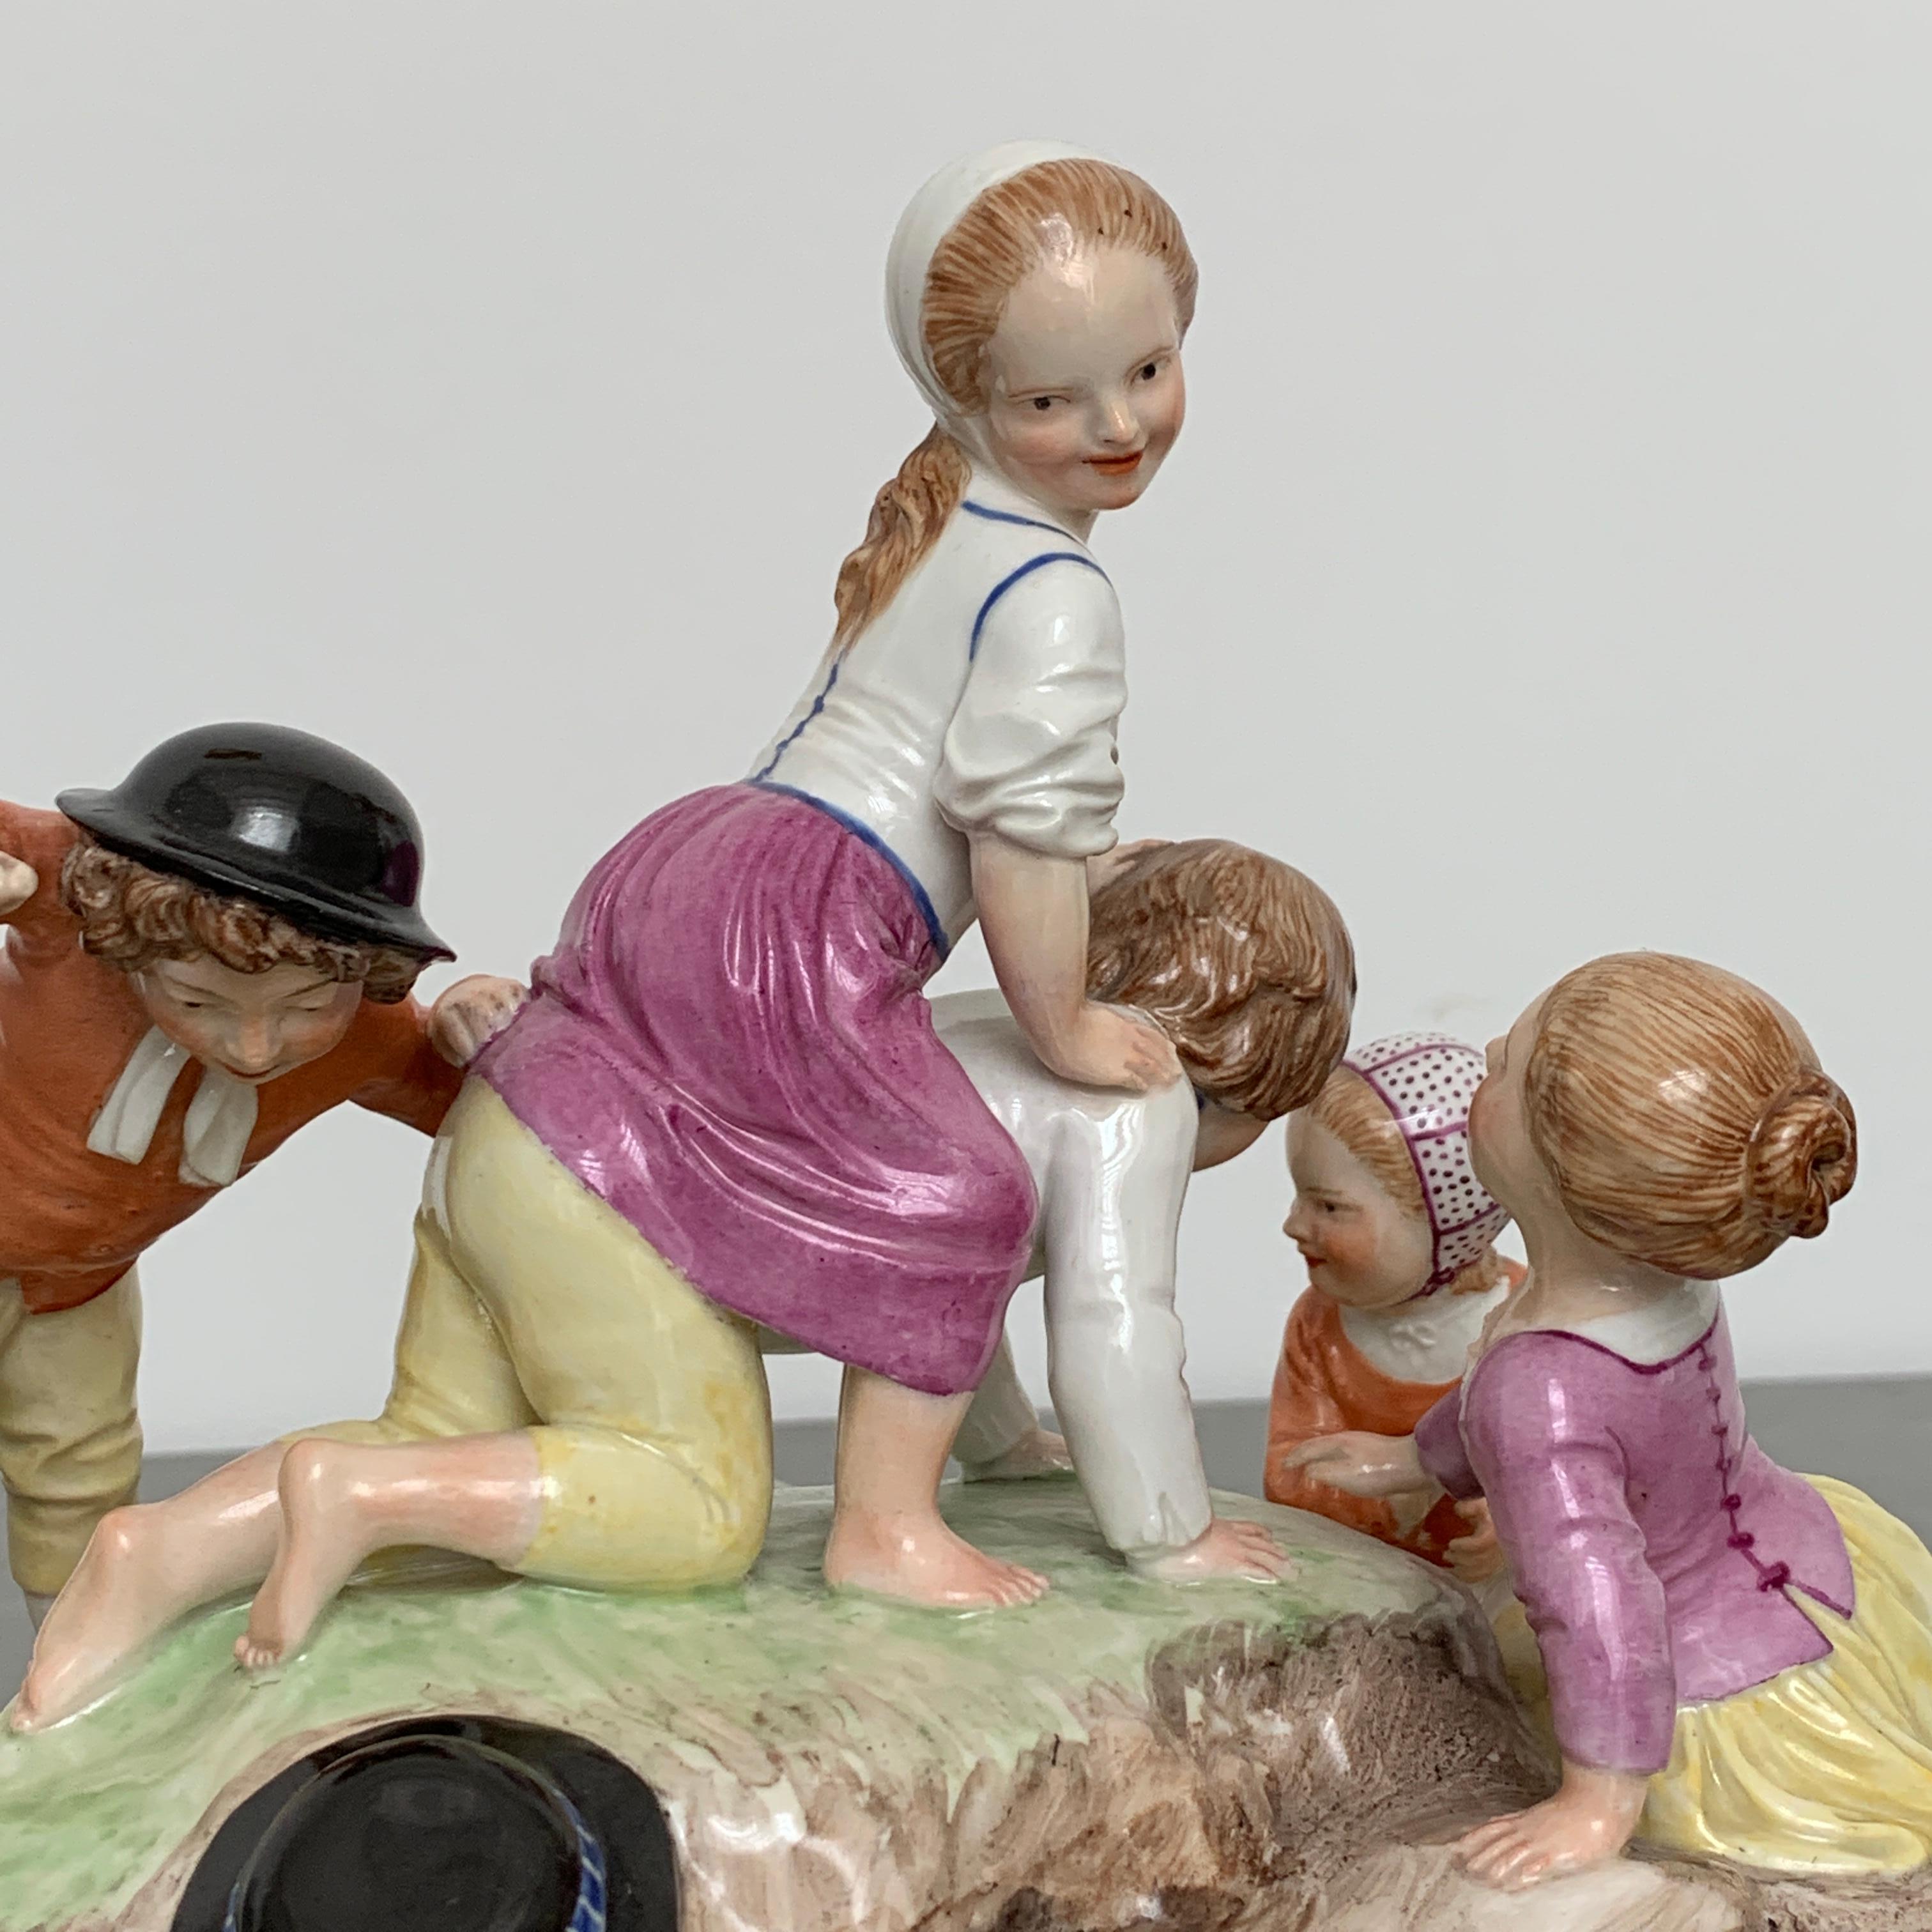 Porcelain 18th Century Frankenthal Group of Playing Children by Johann Peter Melchior For Sale